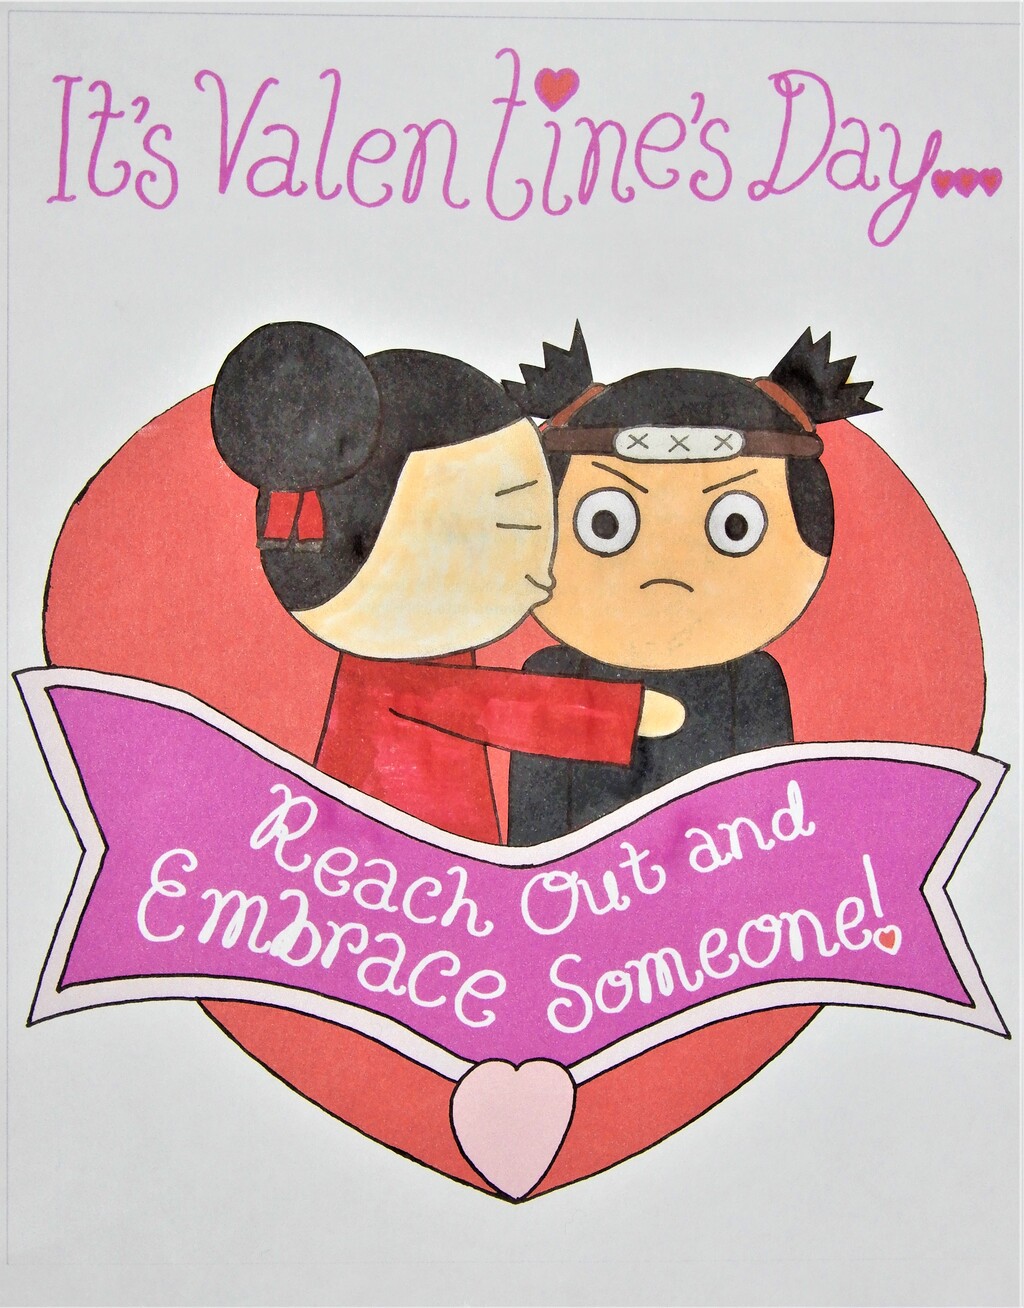 Reach Out and Embrace Someone: Pucca